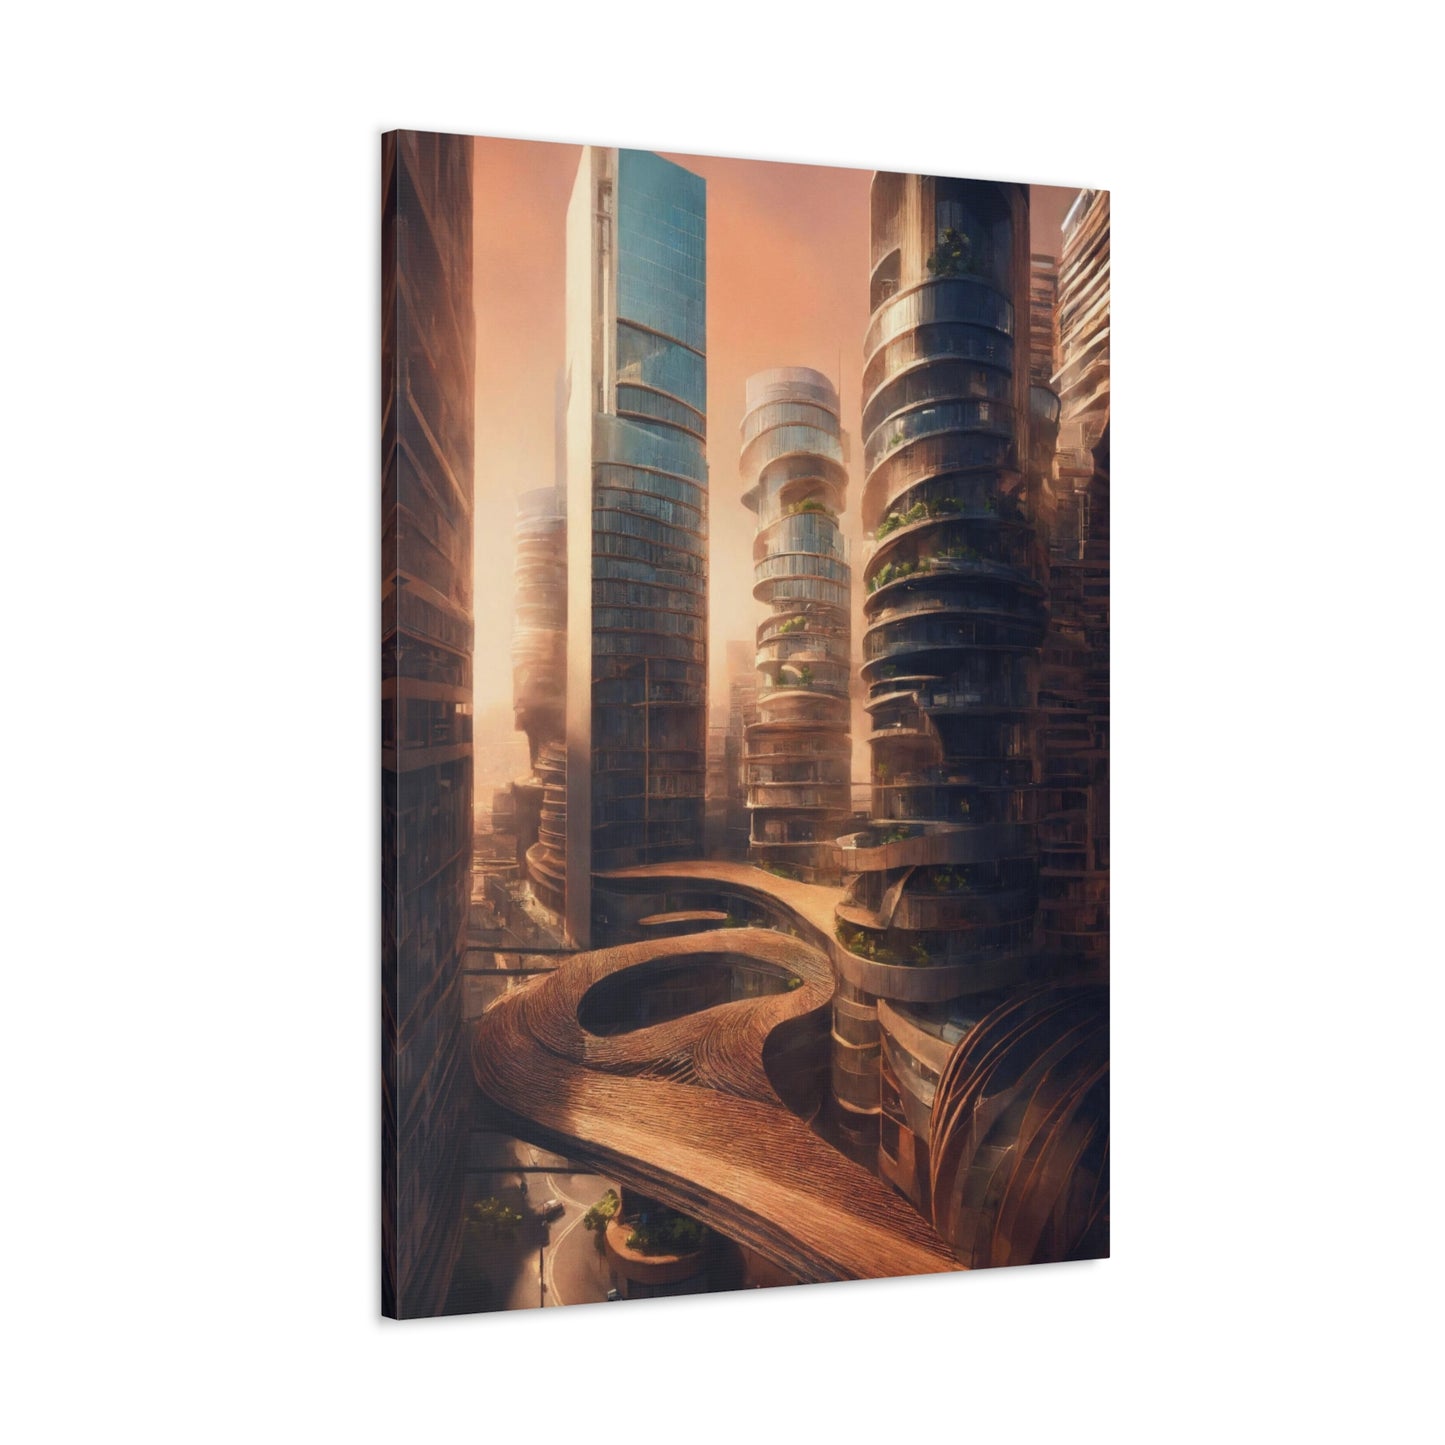 "Elegy in Copper: The Surrendered City"